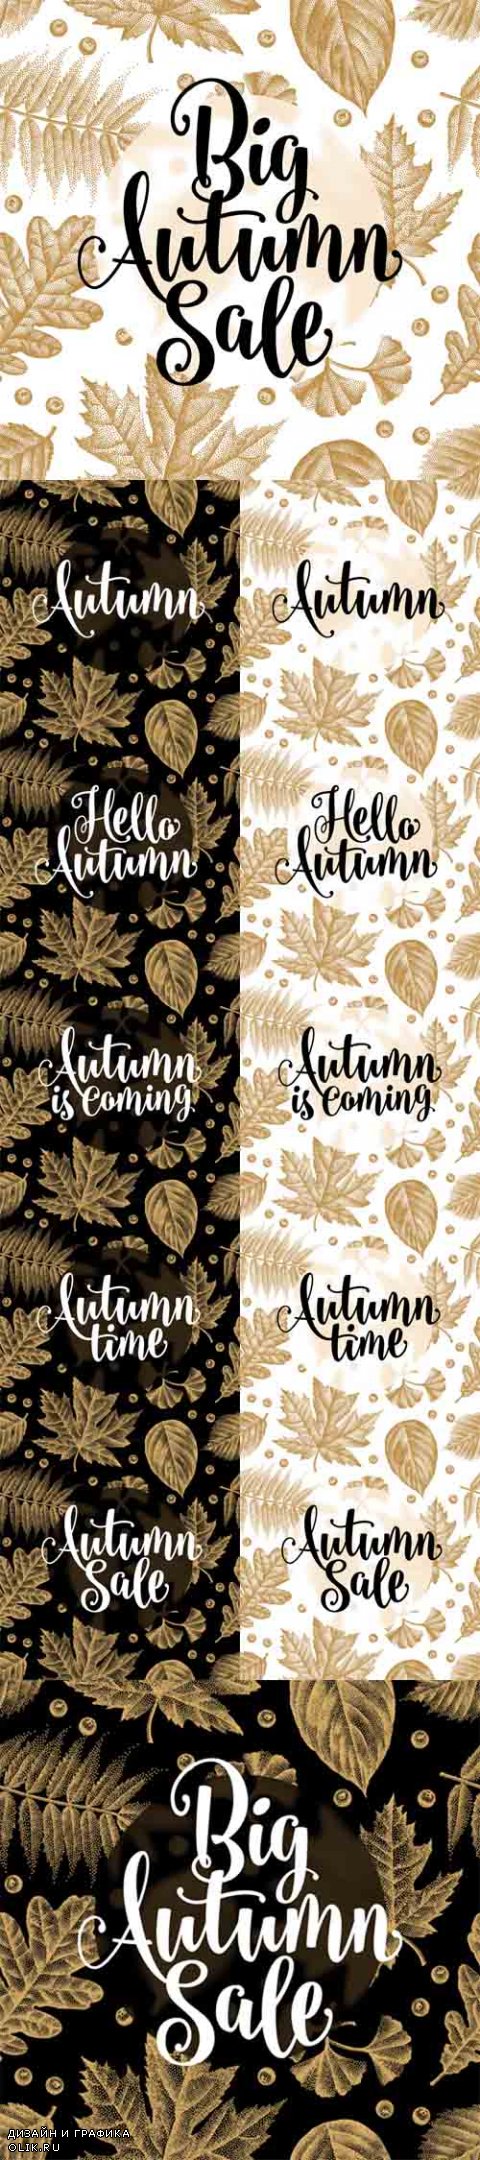 Vector Autumn Sale Calligraphy Phrases on Leaves Background